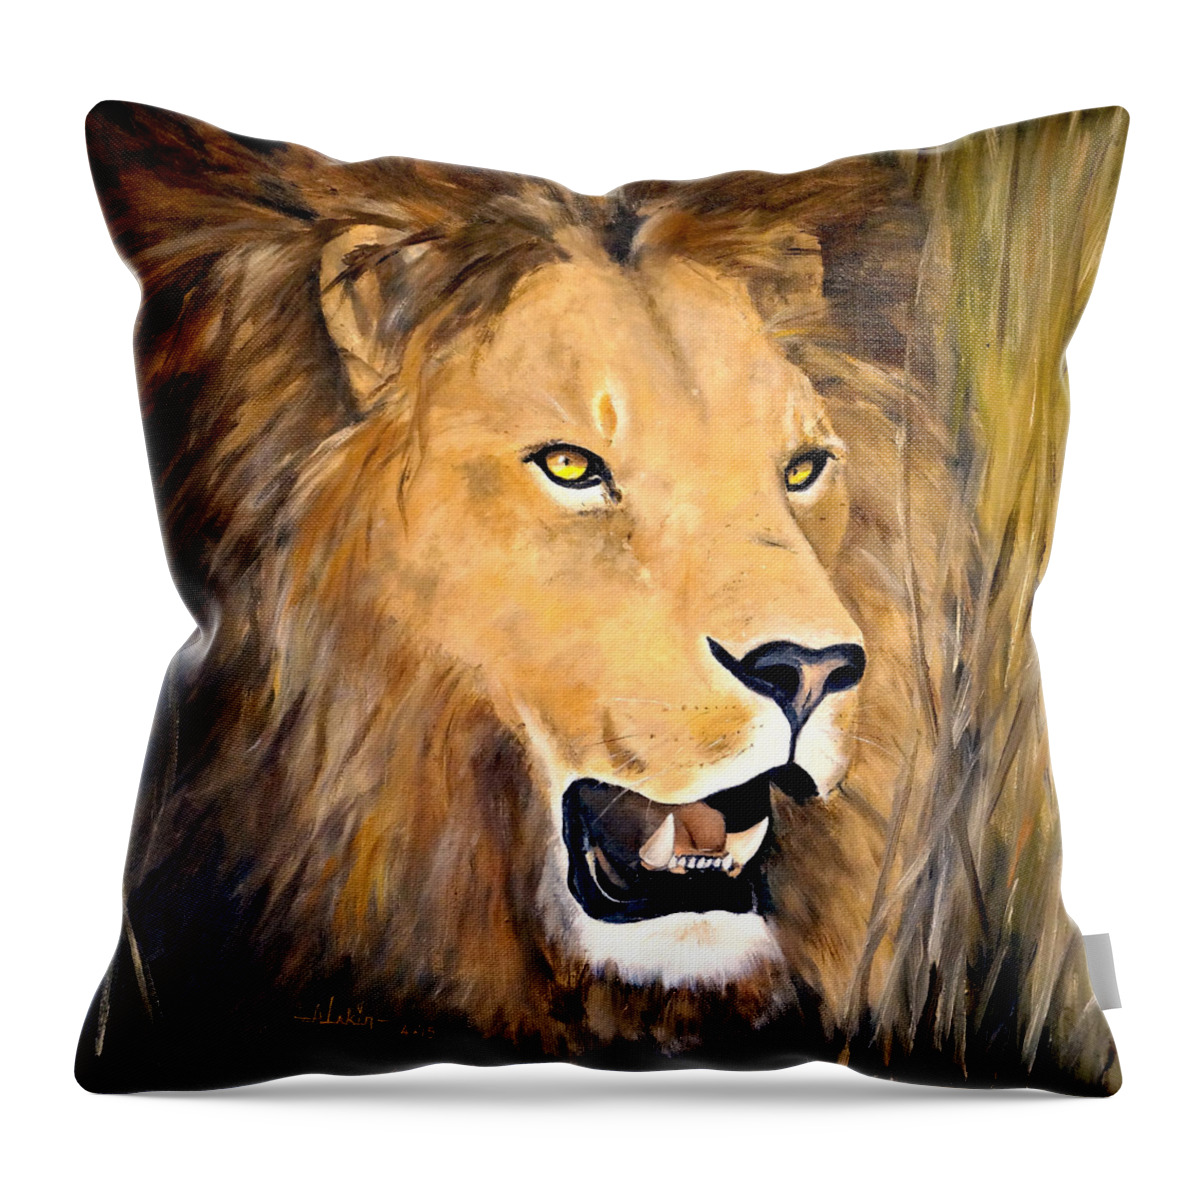 African Art Throw Pillow featuring the painting Leo by Alan Lakin